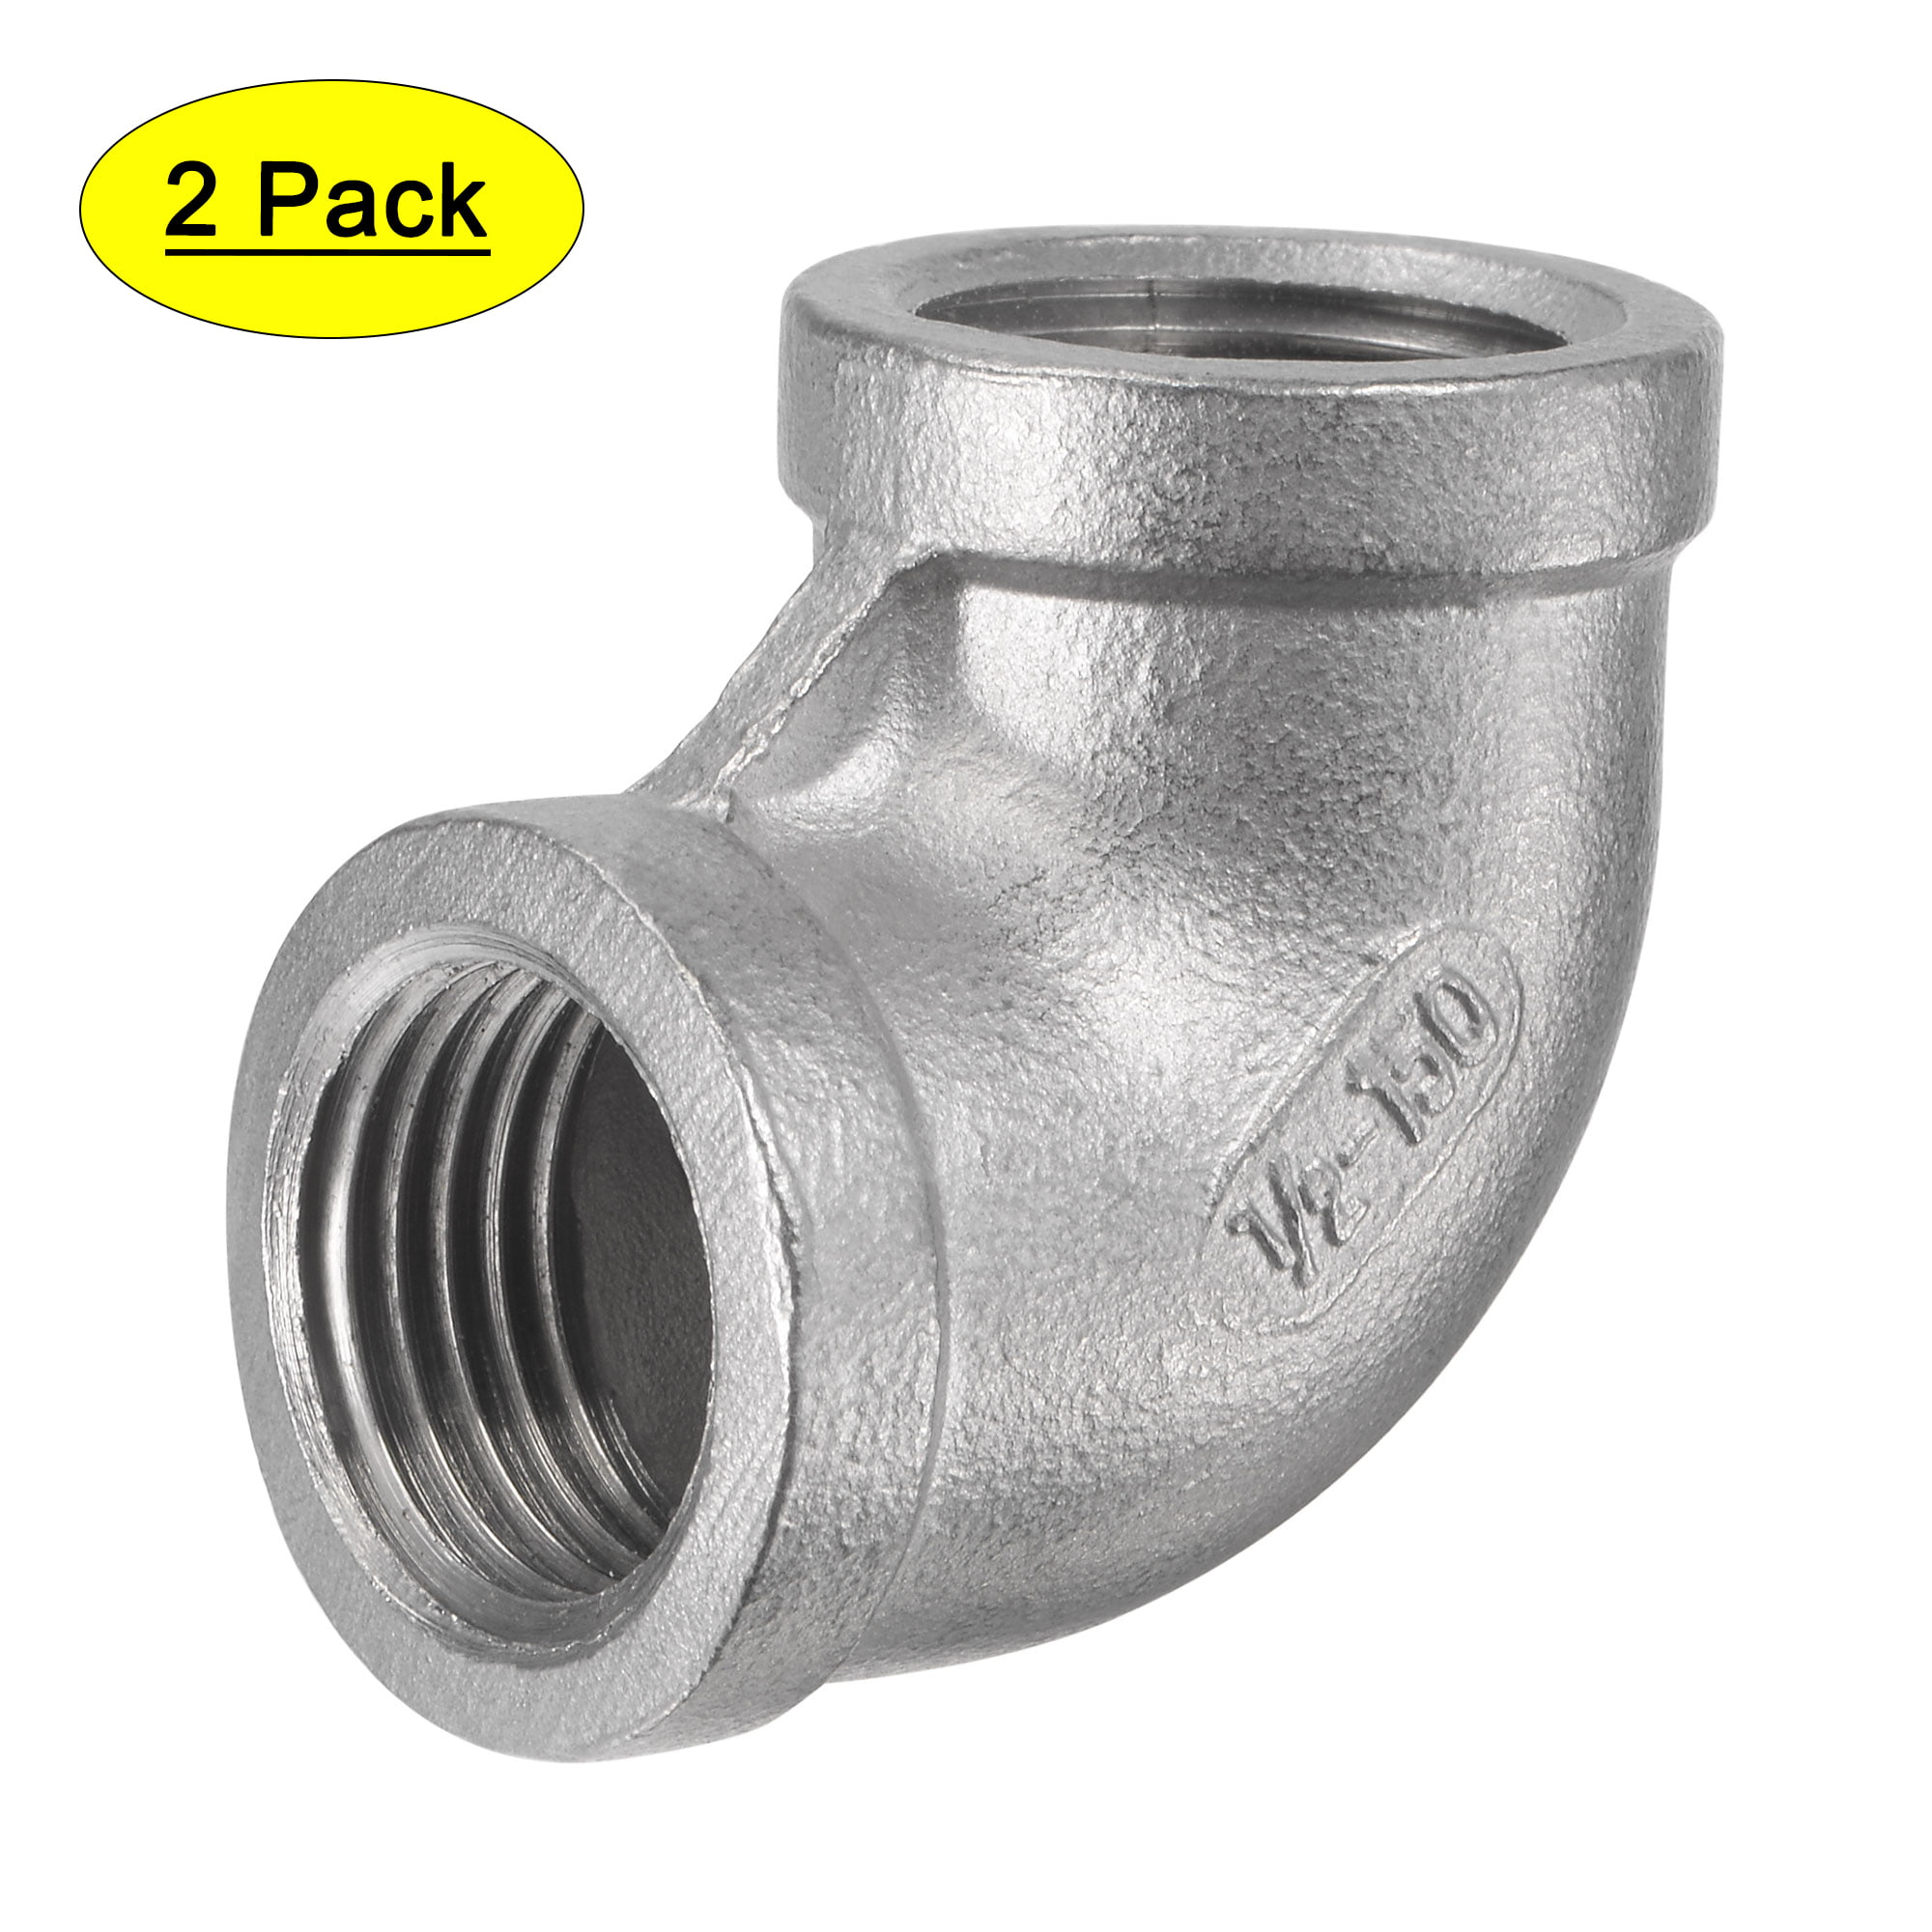 3000 PSI 1" NPT Pipe Thread Cap Forged 304 Stainless Steel Lead & Brass Free